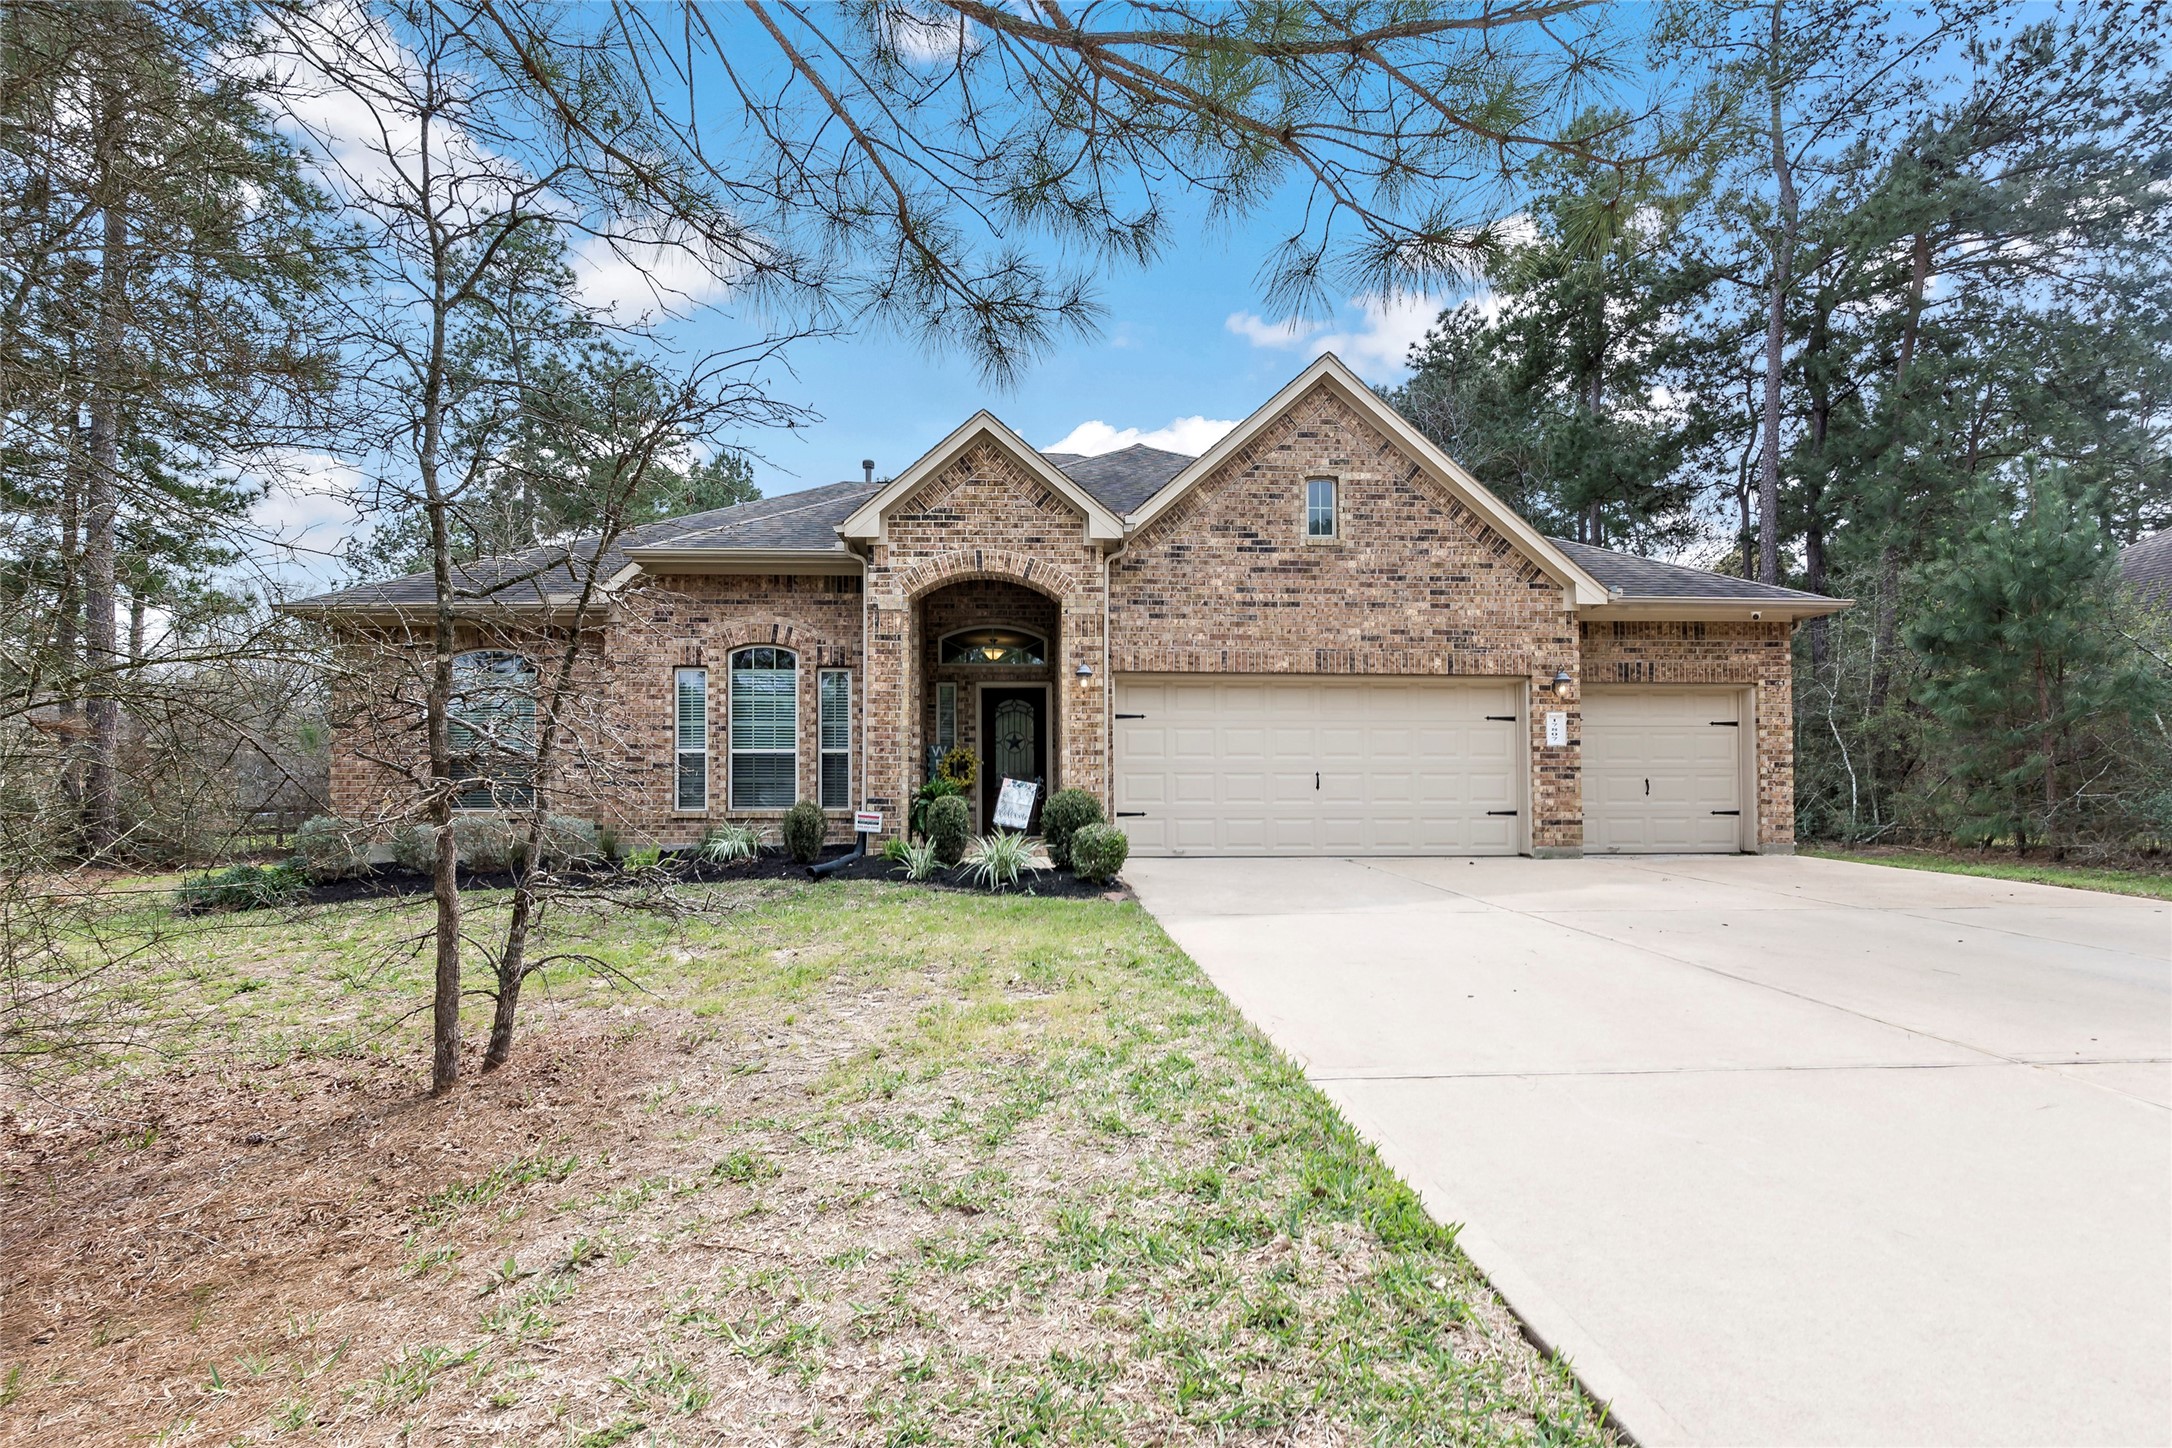 17807 Country Grove, Magnolia, Texas, 77355, United States, 4 Bedrooms Bedrooms, ,2 BathroomsBathrooms,Residential,For Sale,17807 Country Grove,1480733